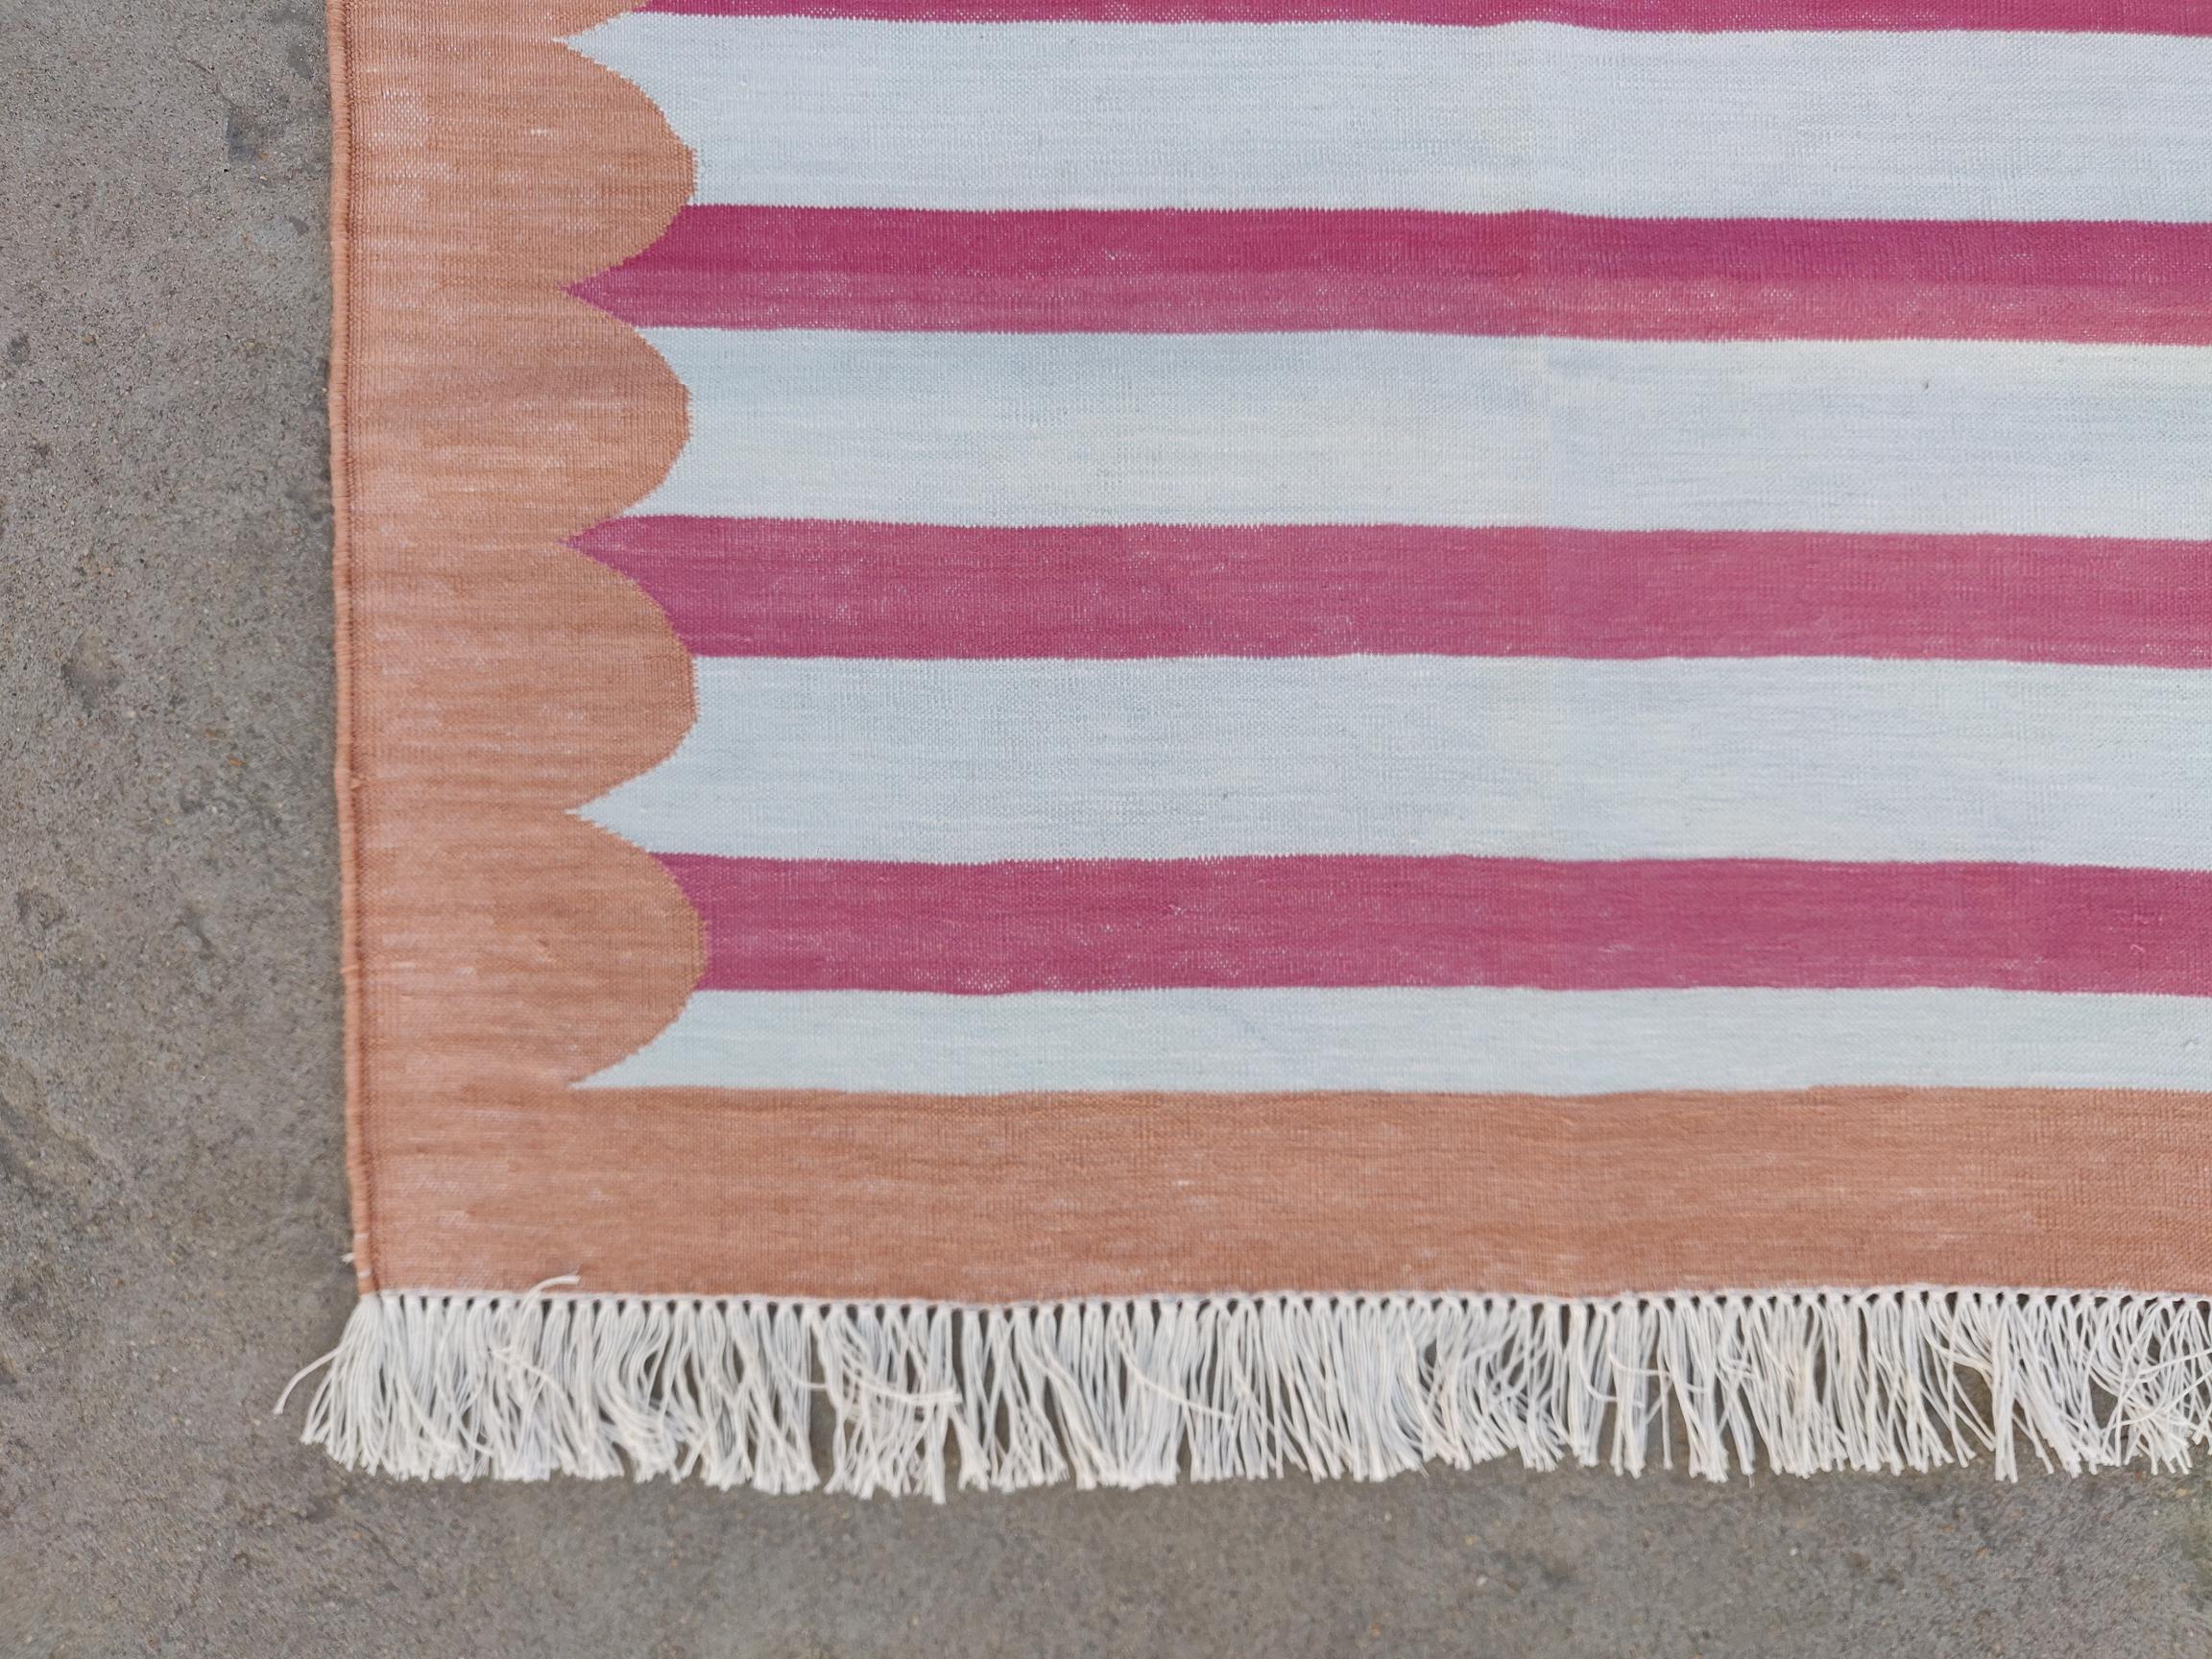 Contemporary Handmade Cotton Area Flat Weave Rug, 3x5 Pink And Tan Striped Indian Dhurrie Rug For Sale